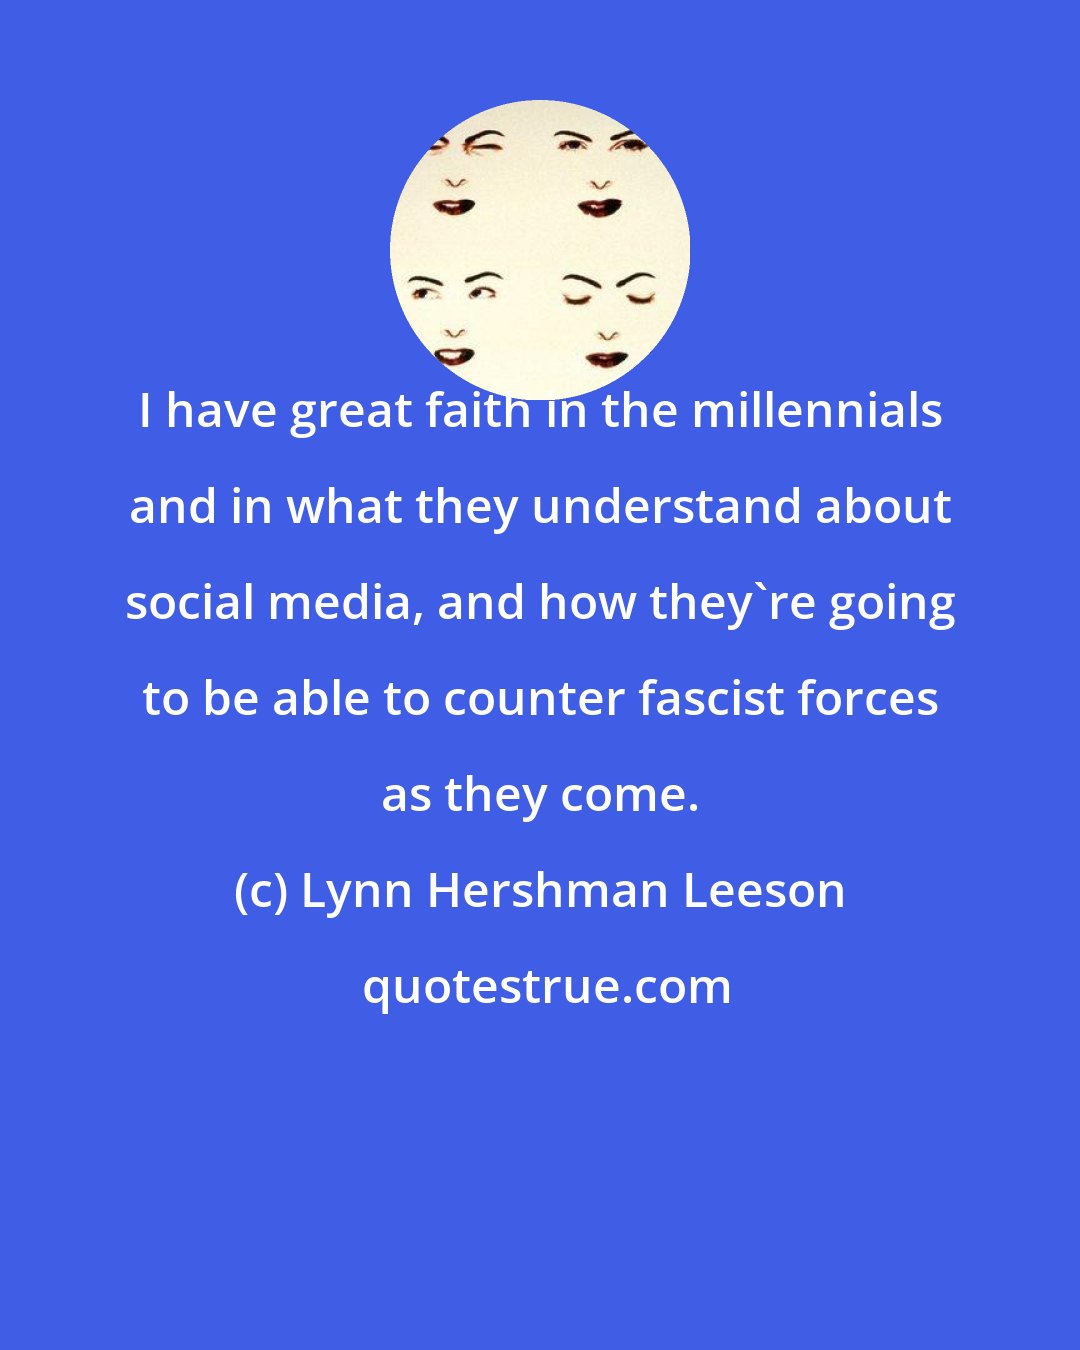 Lynn Hershman Leeson: I have great faith in the millennials and in what they understand about social media, and how they're going to be able to counter fascist forces as they come.